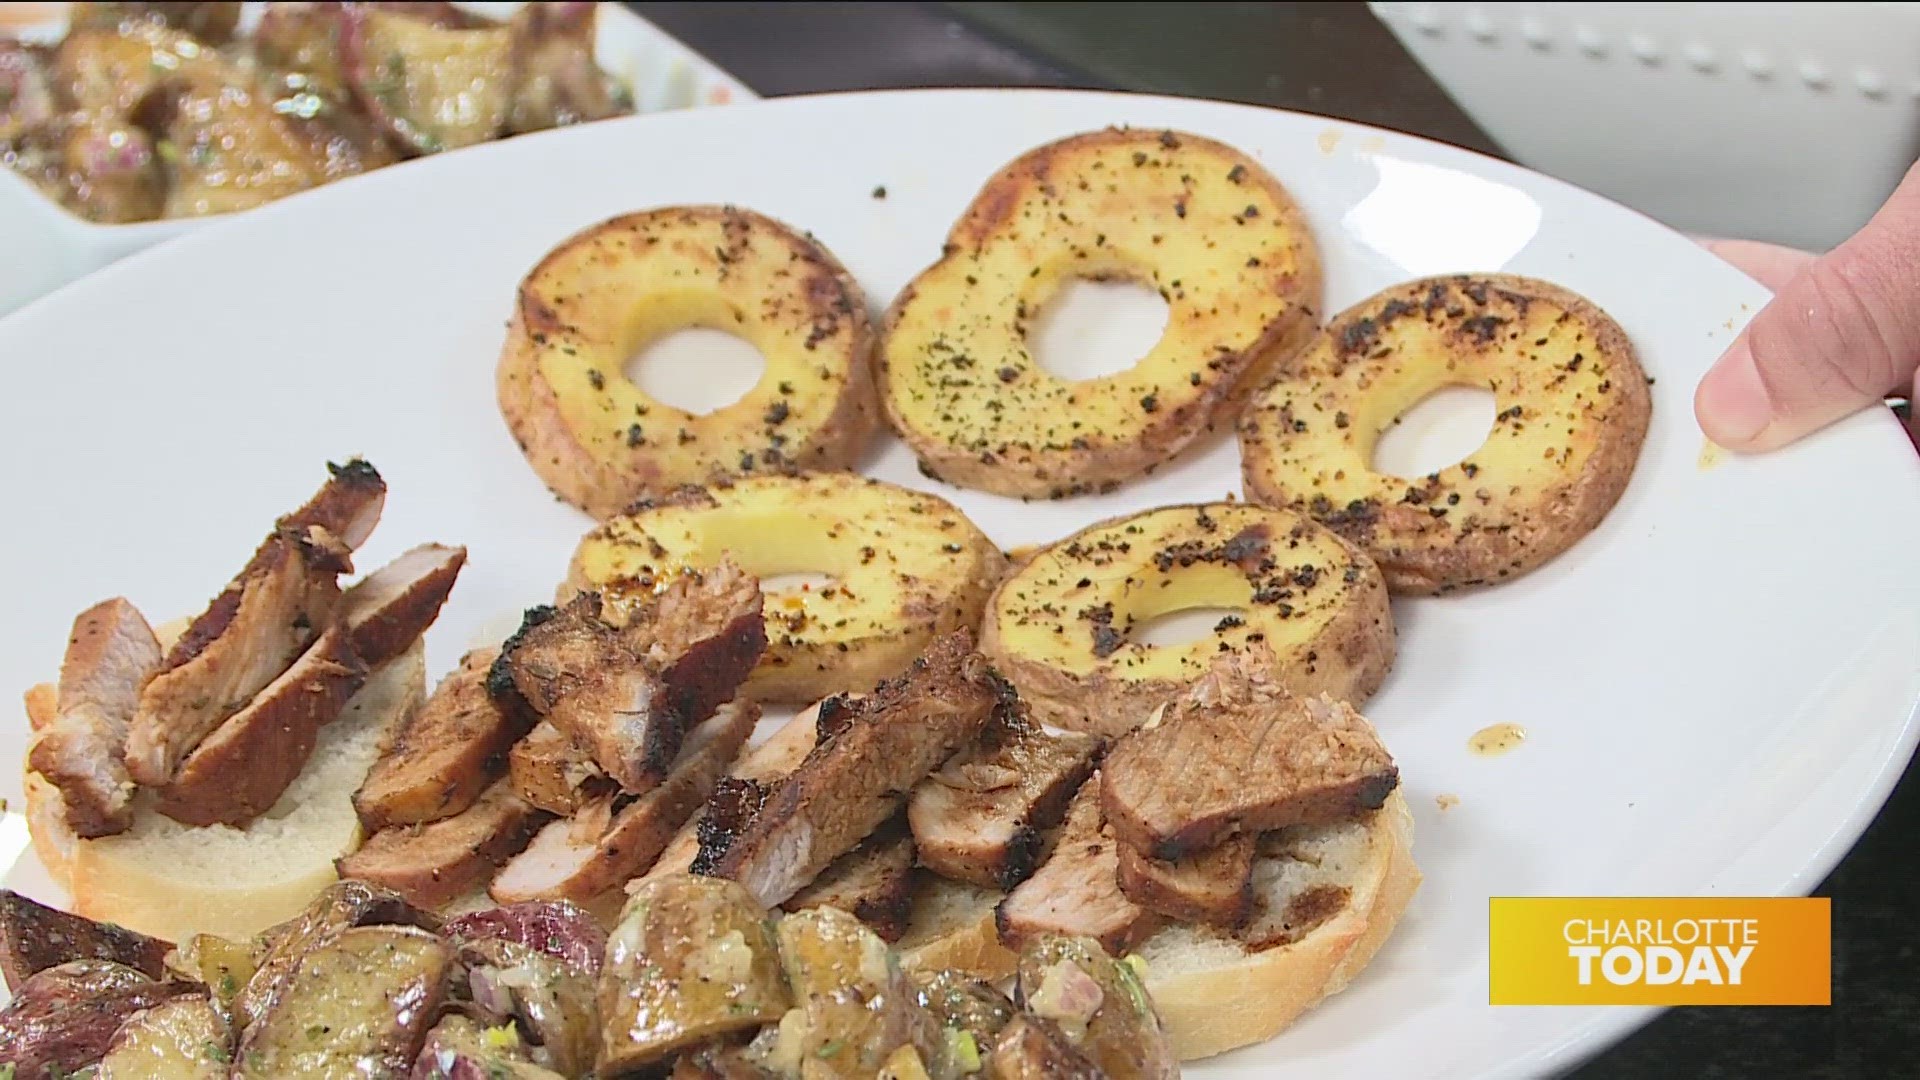 Grill master Ernie Adler shares some delicious French recipes to celebrate 100 days to the Olympic games